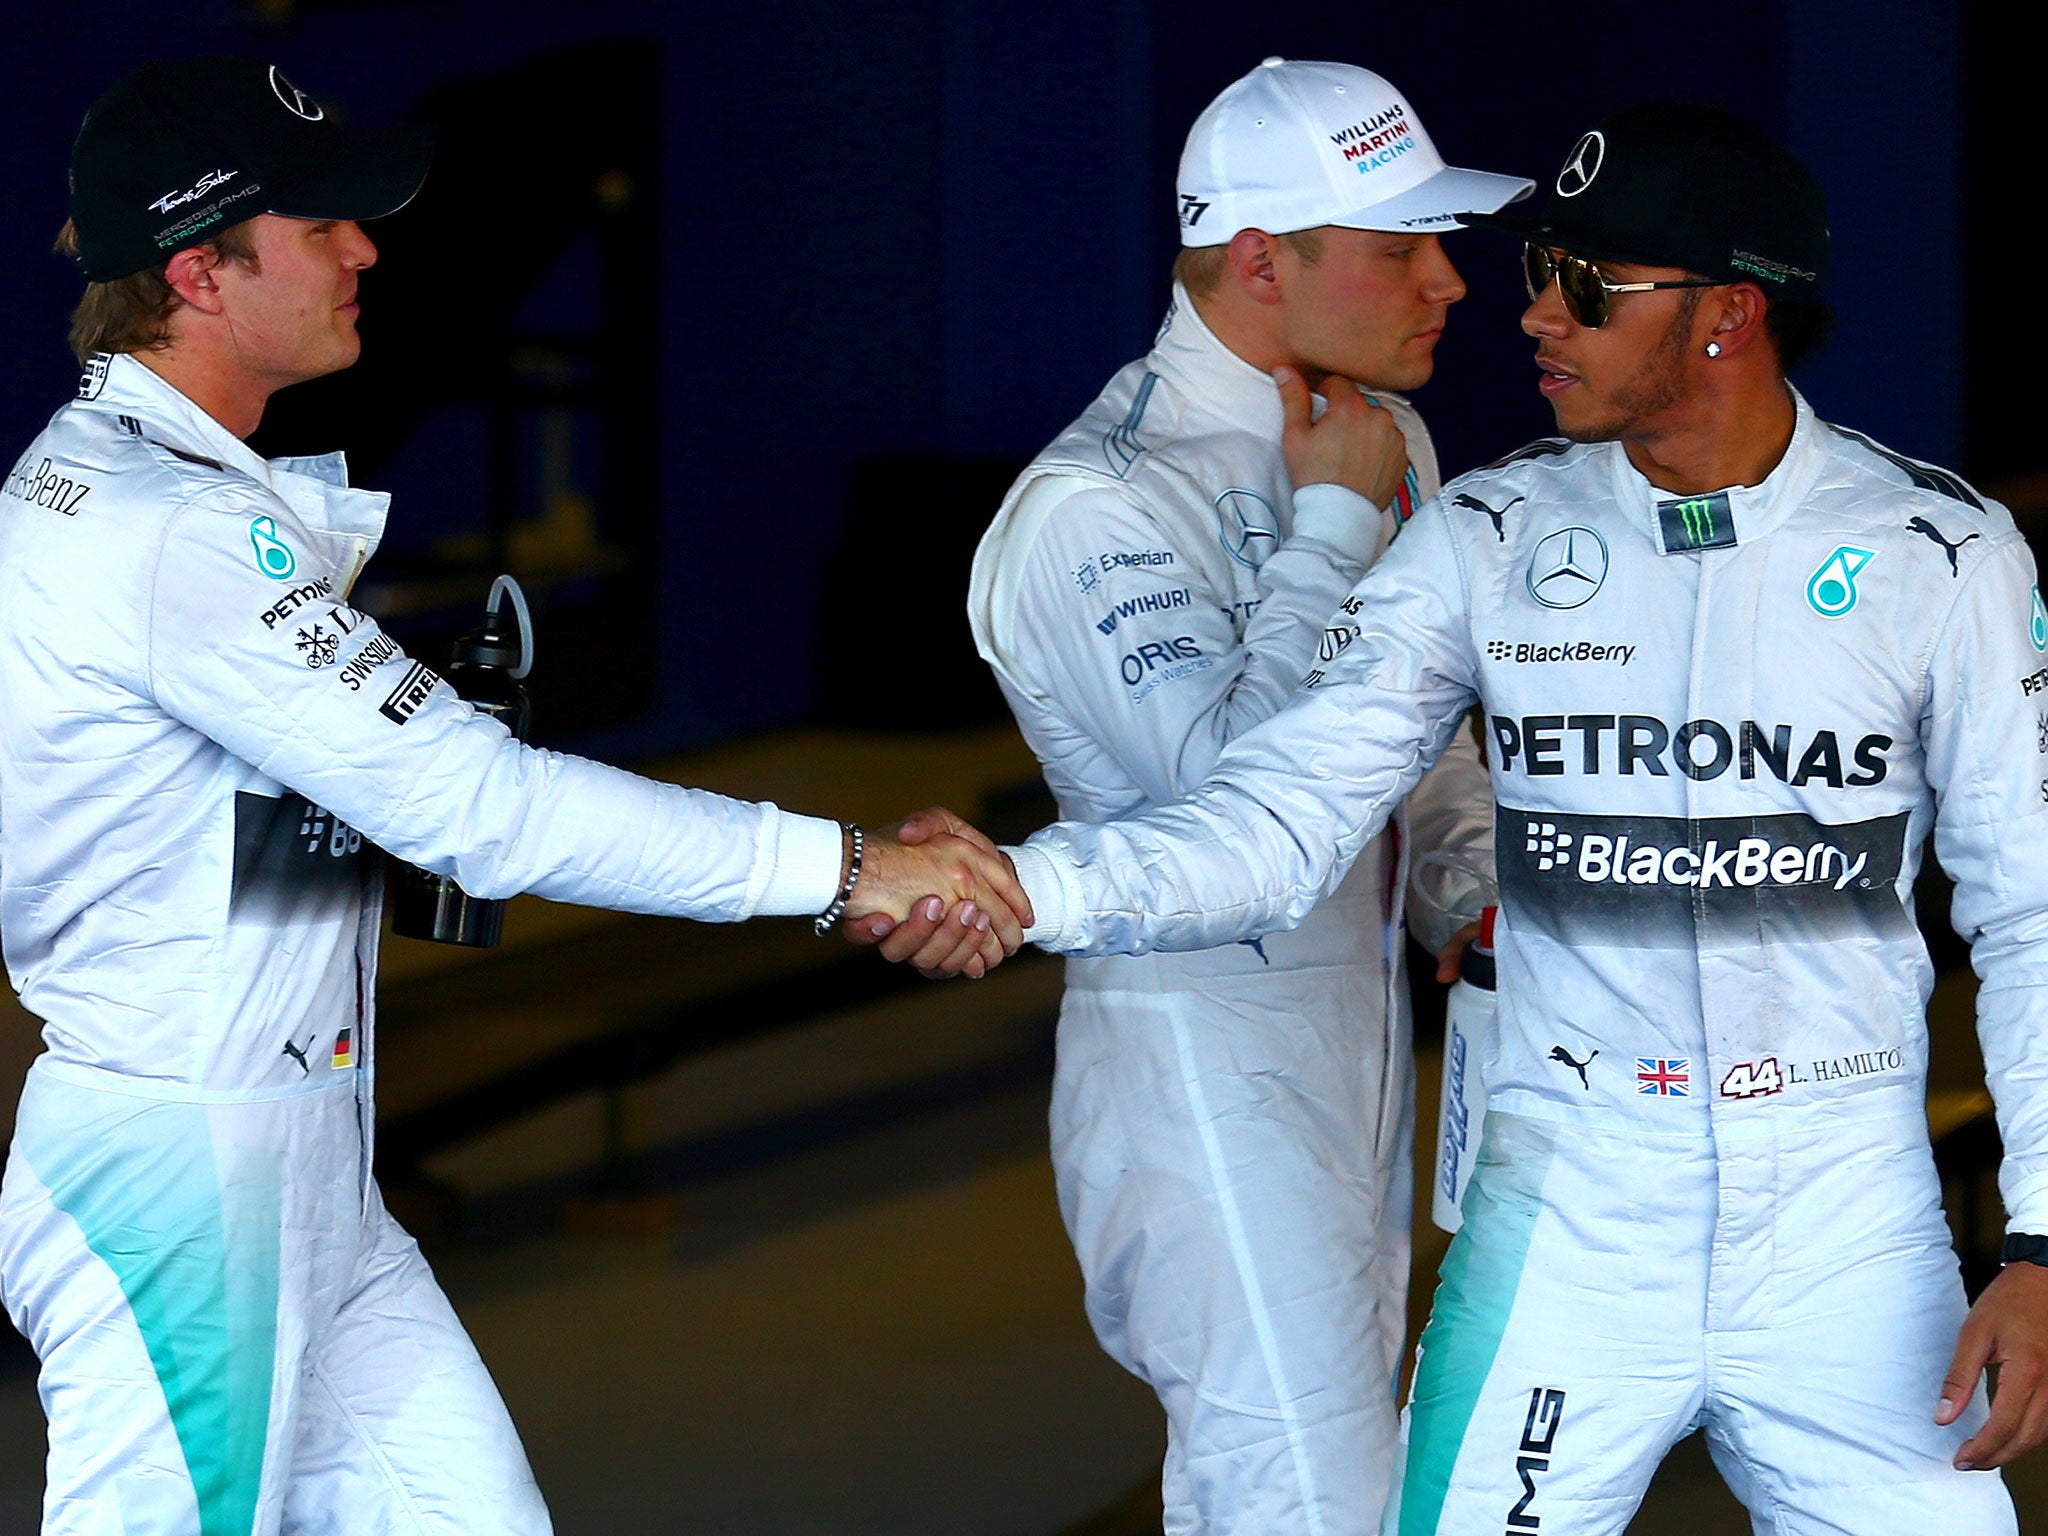 Nico Rosberg shakes hands with Lewis Hamilton after the latter secures pole position